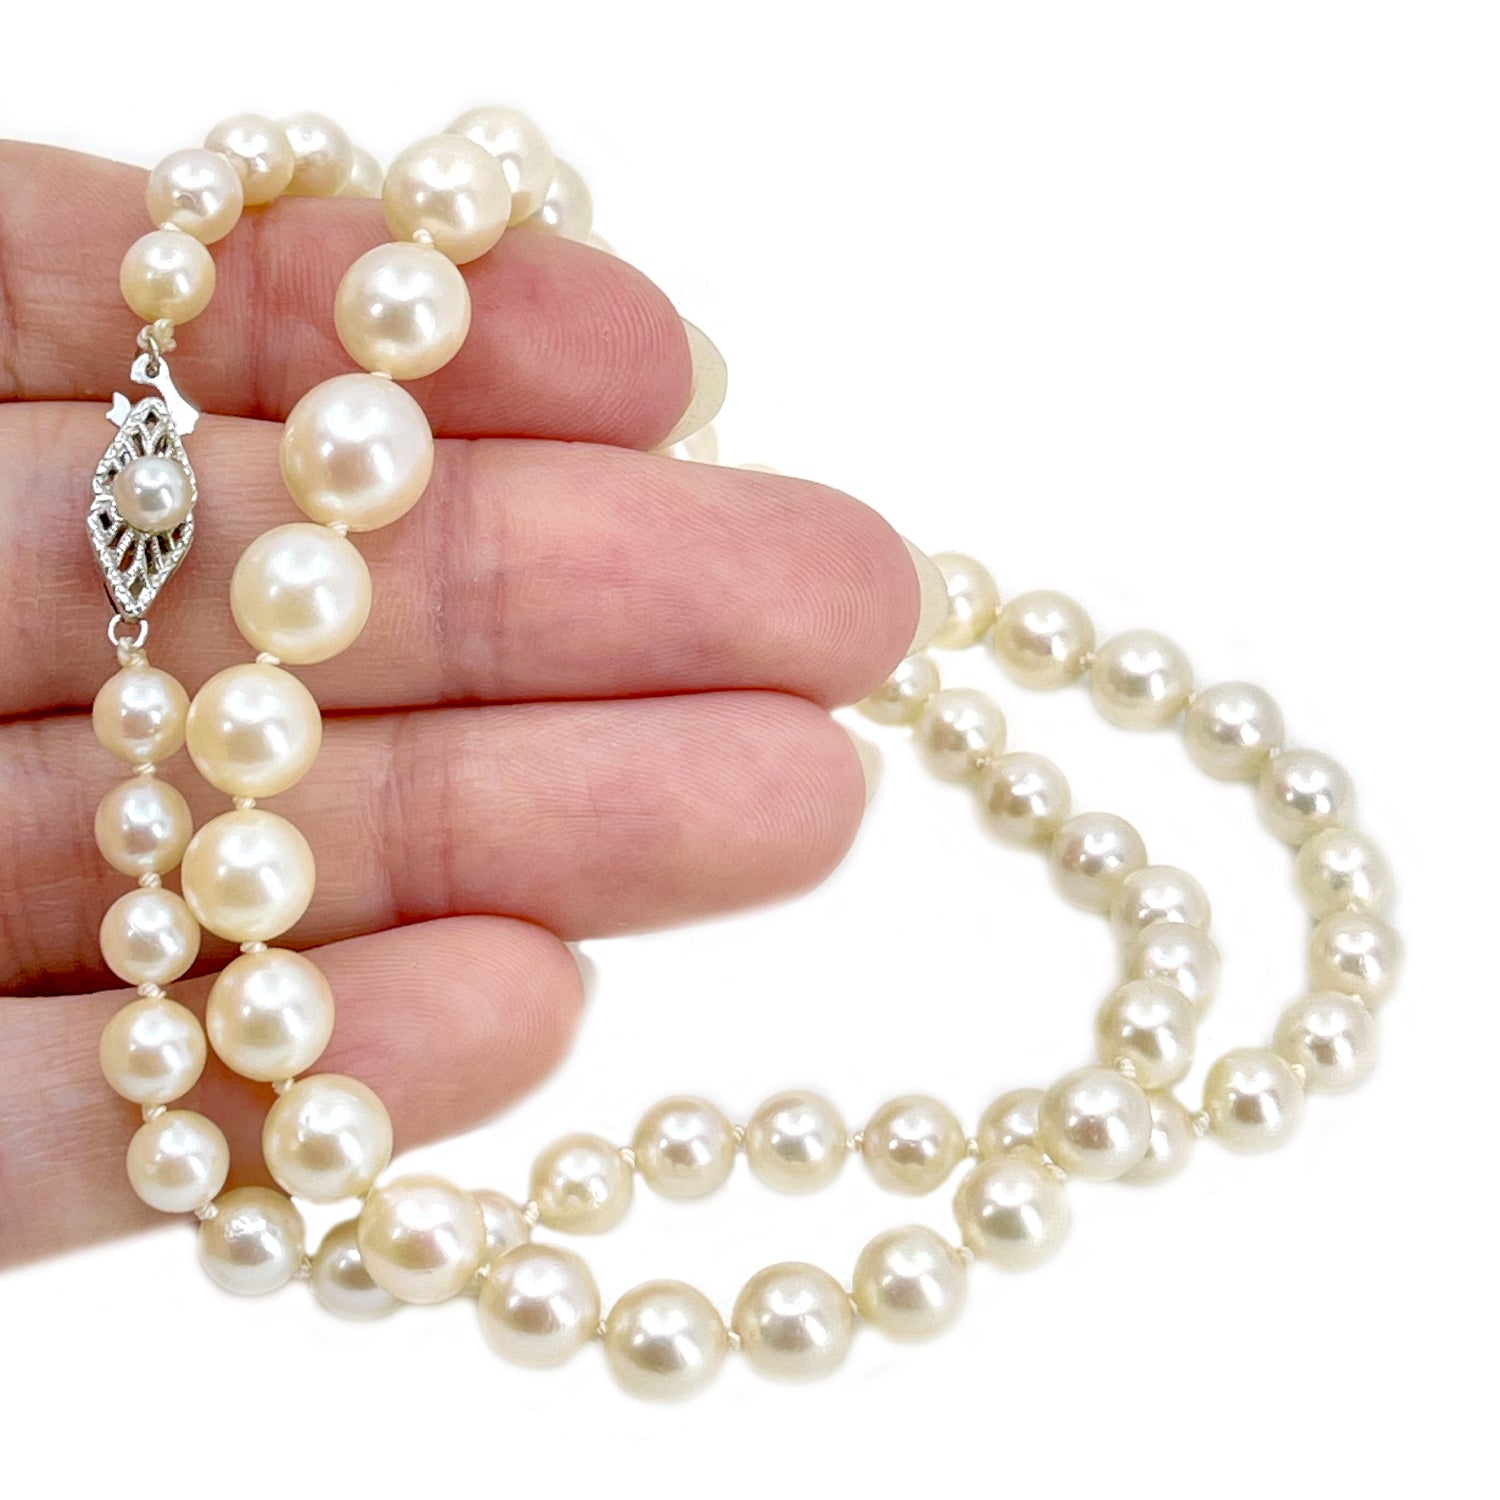 Vintage Filigree Japanese Saltwater Cultured Akoya Pearl Necklace - 14K White Gold 18.50 Inch